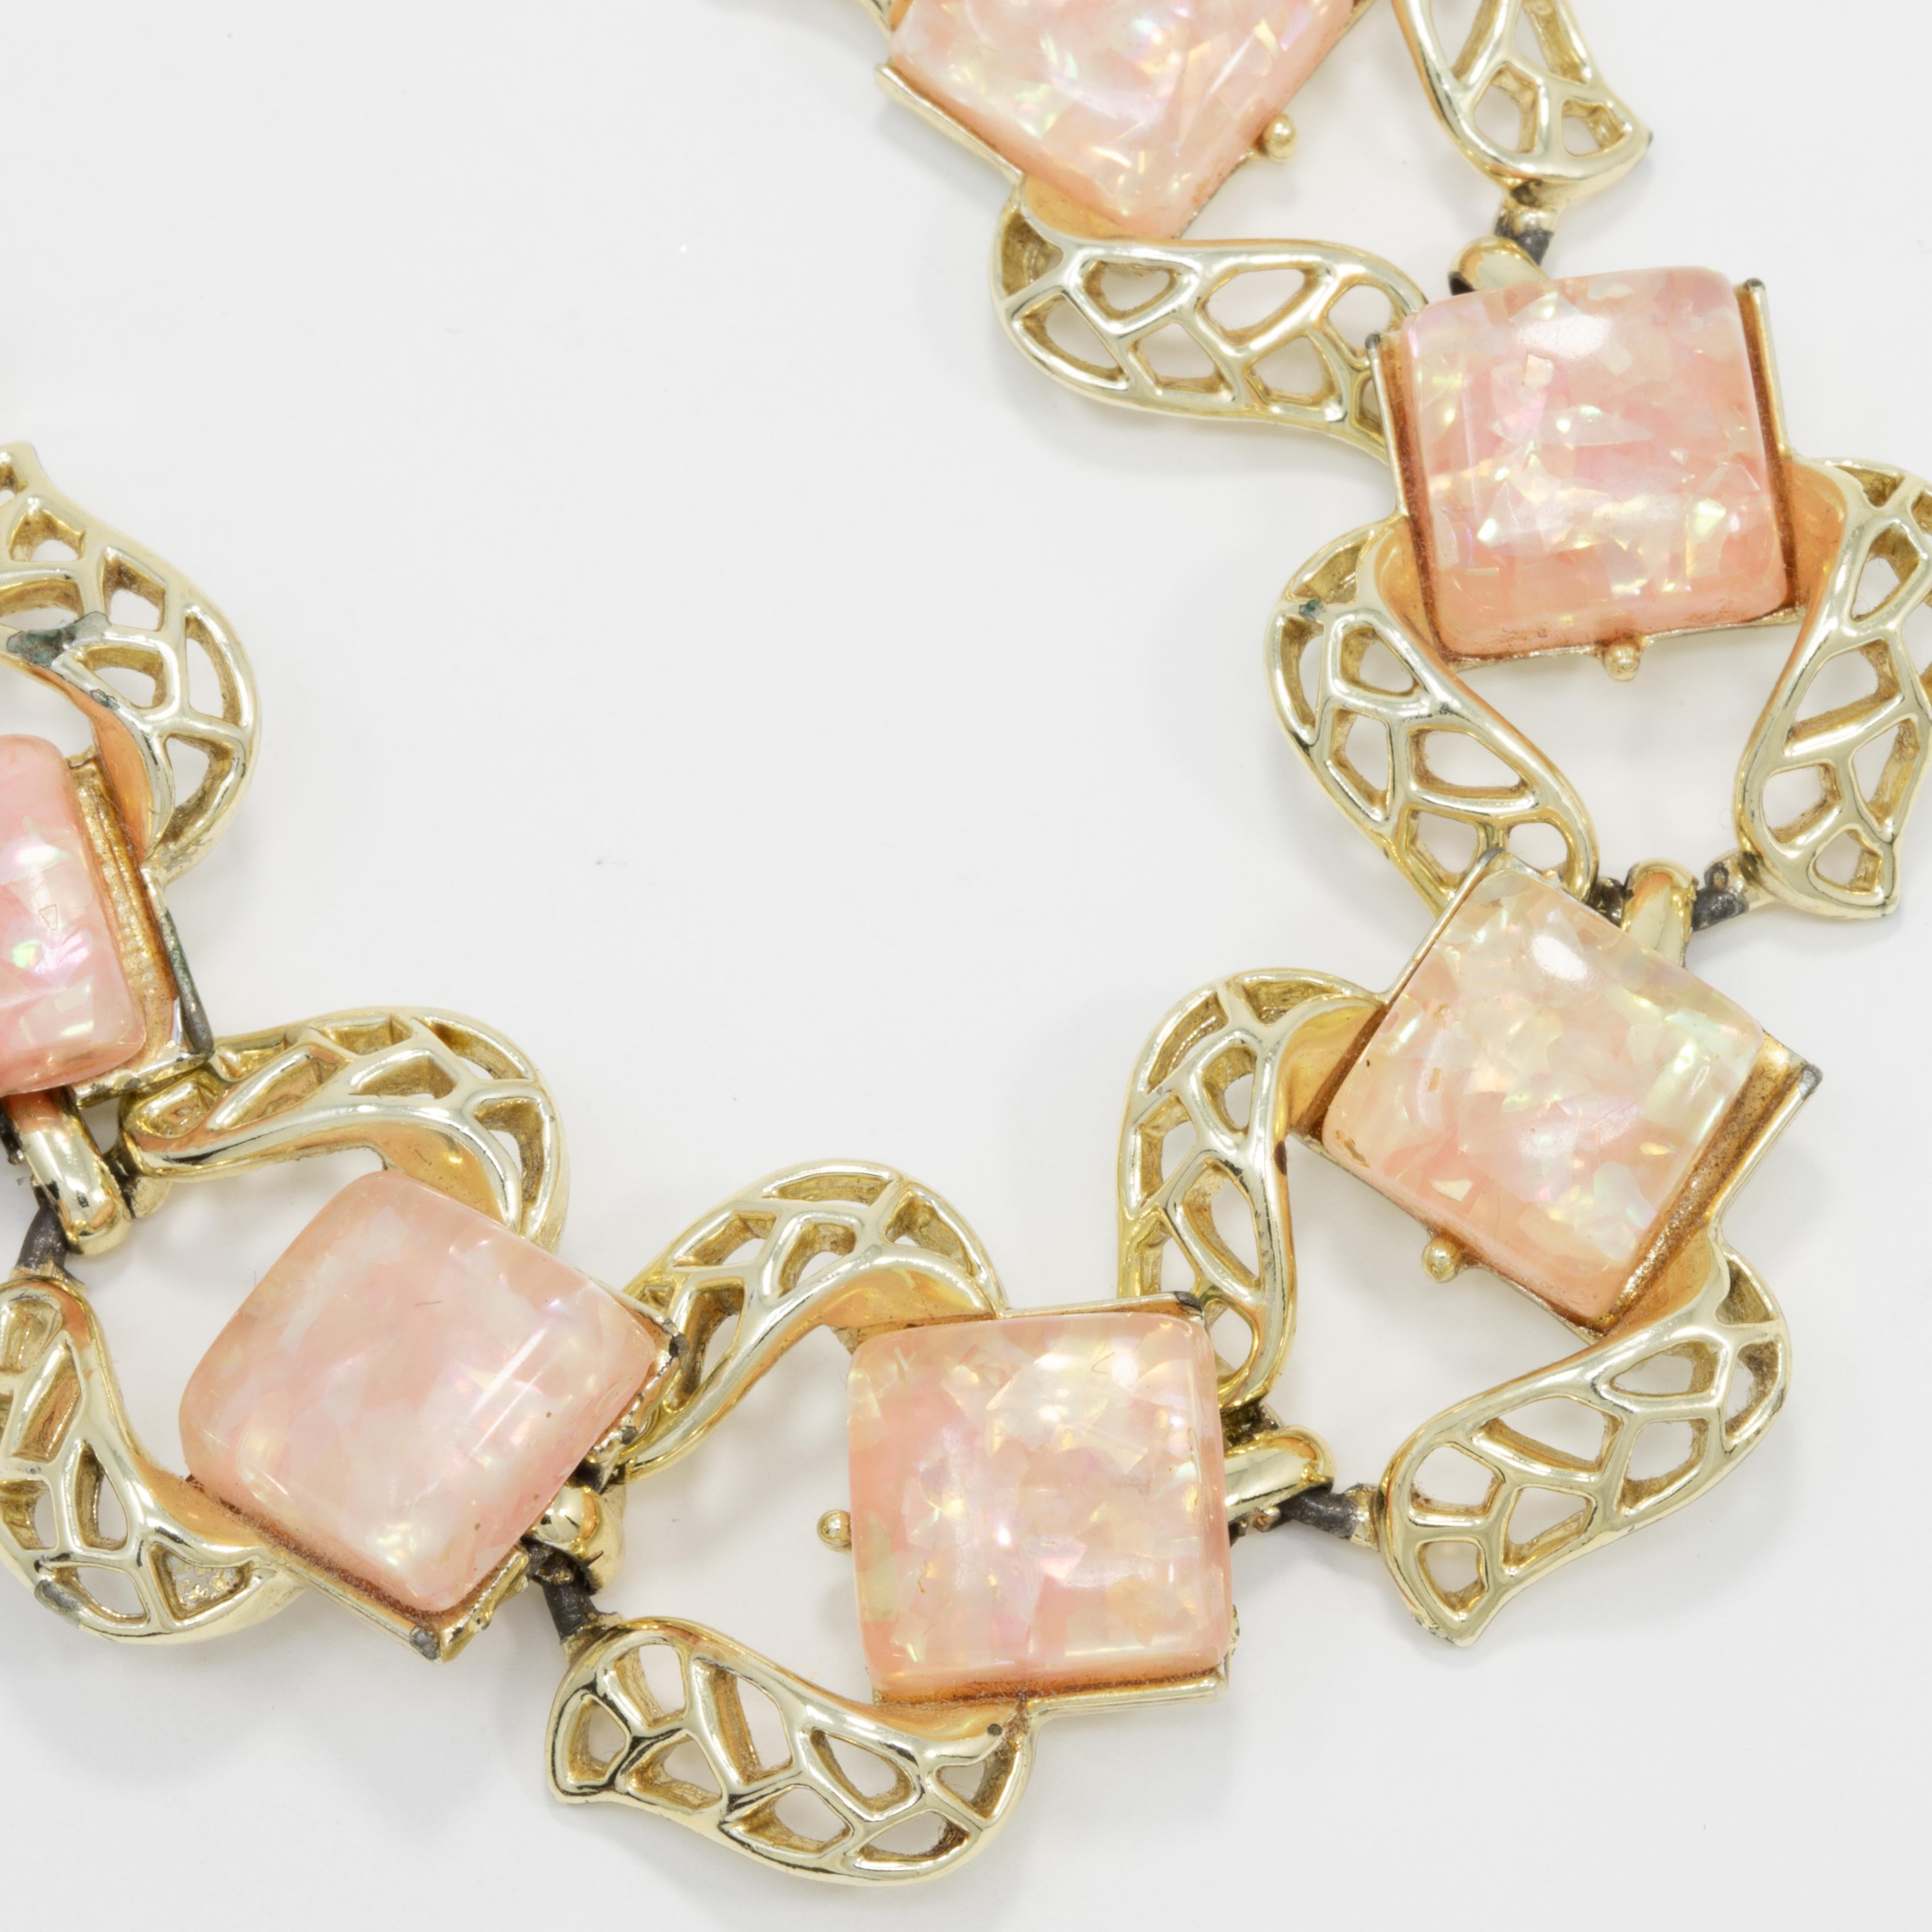 Stylish link bracelet by Coro, featuring pink quartz crystals on accented golden links.

Gold-plated. Faux-quartz. Fold-over snap clasp.

Marks / hallmarks / etc: Coro